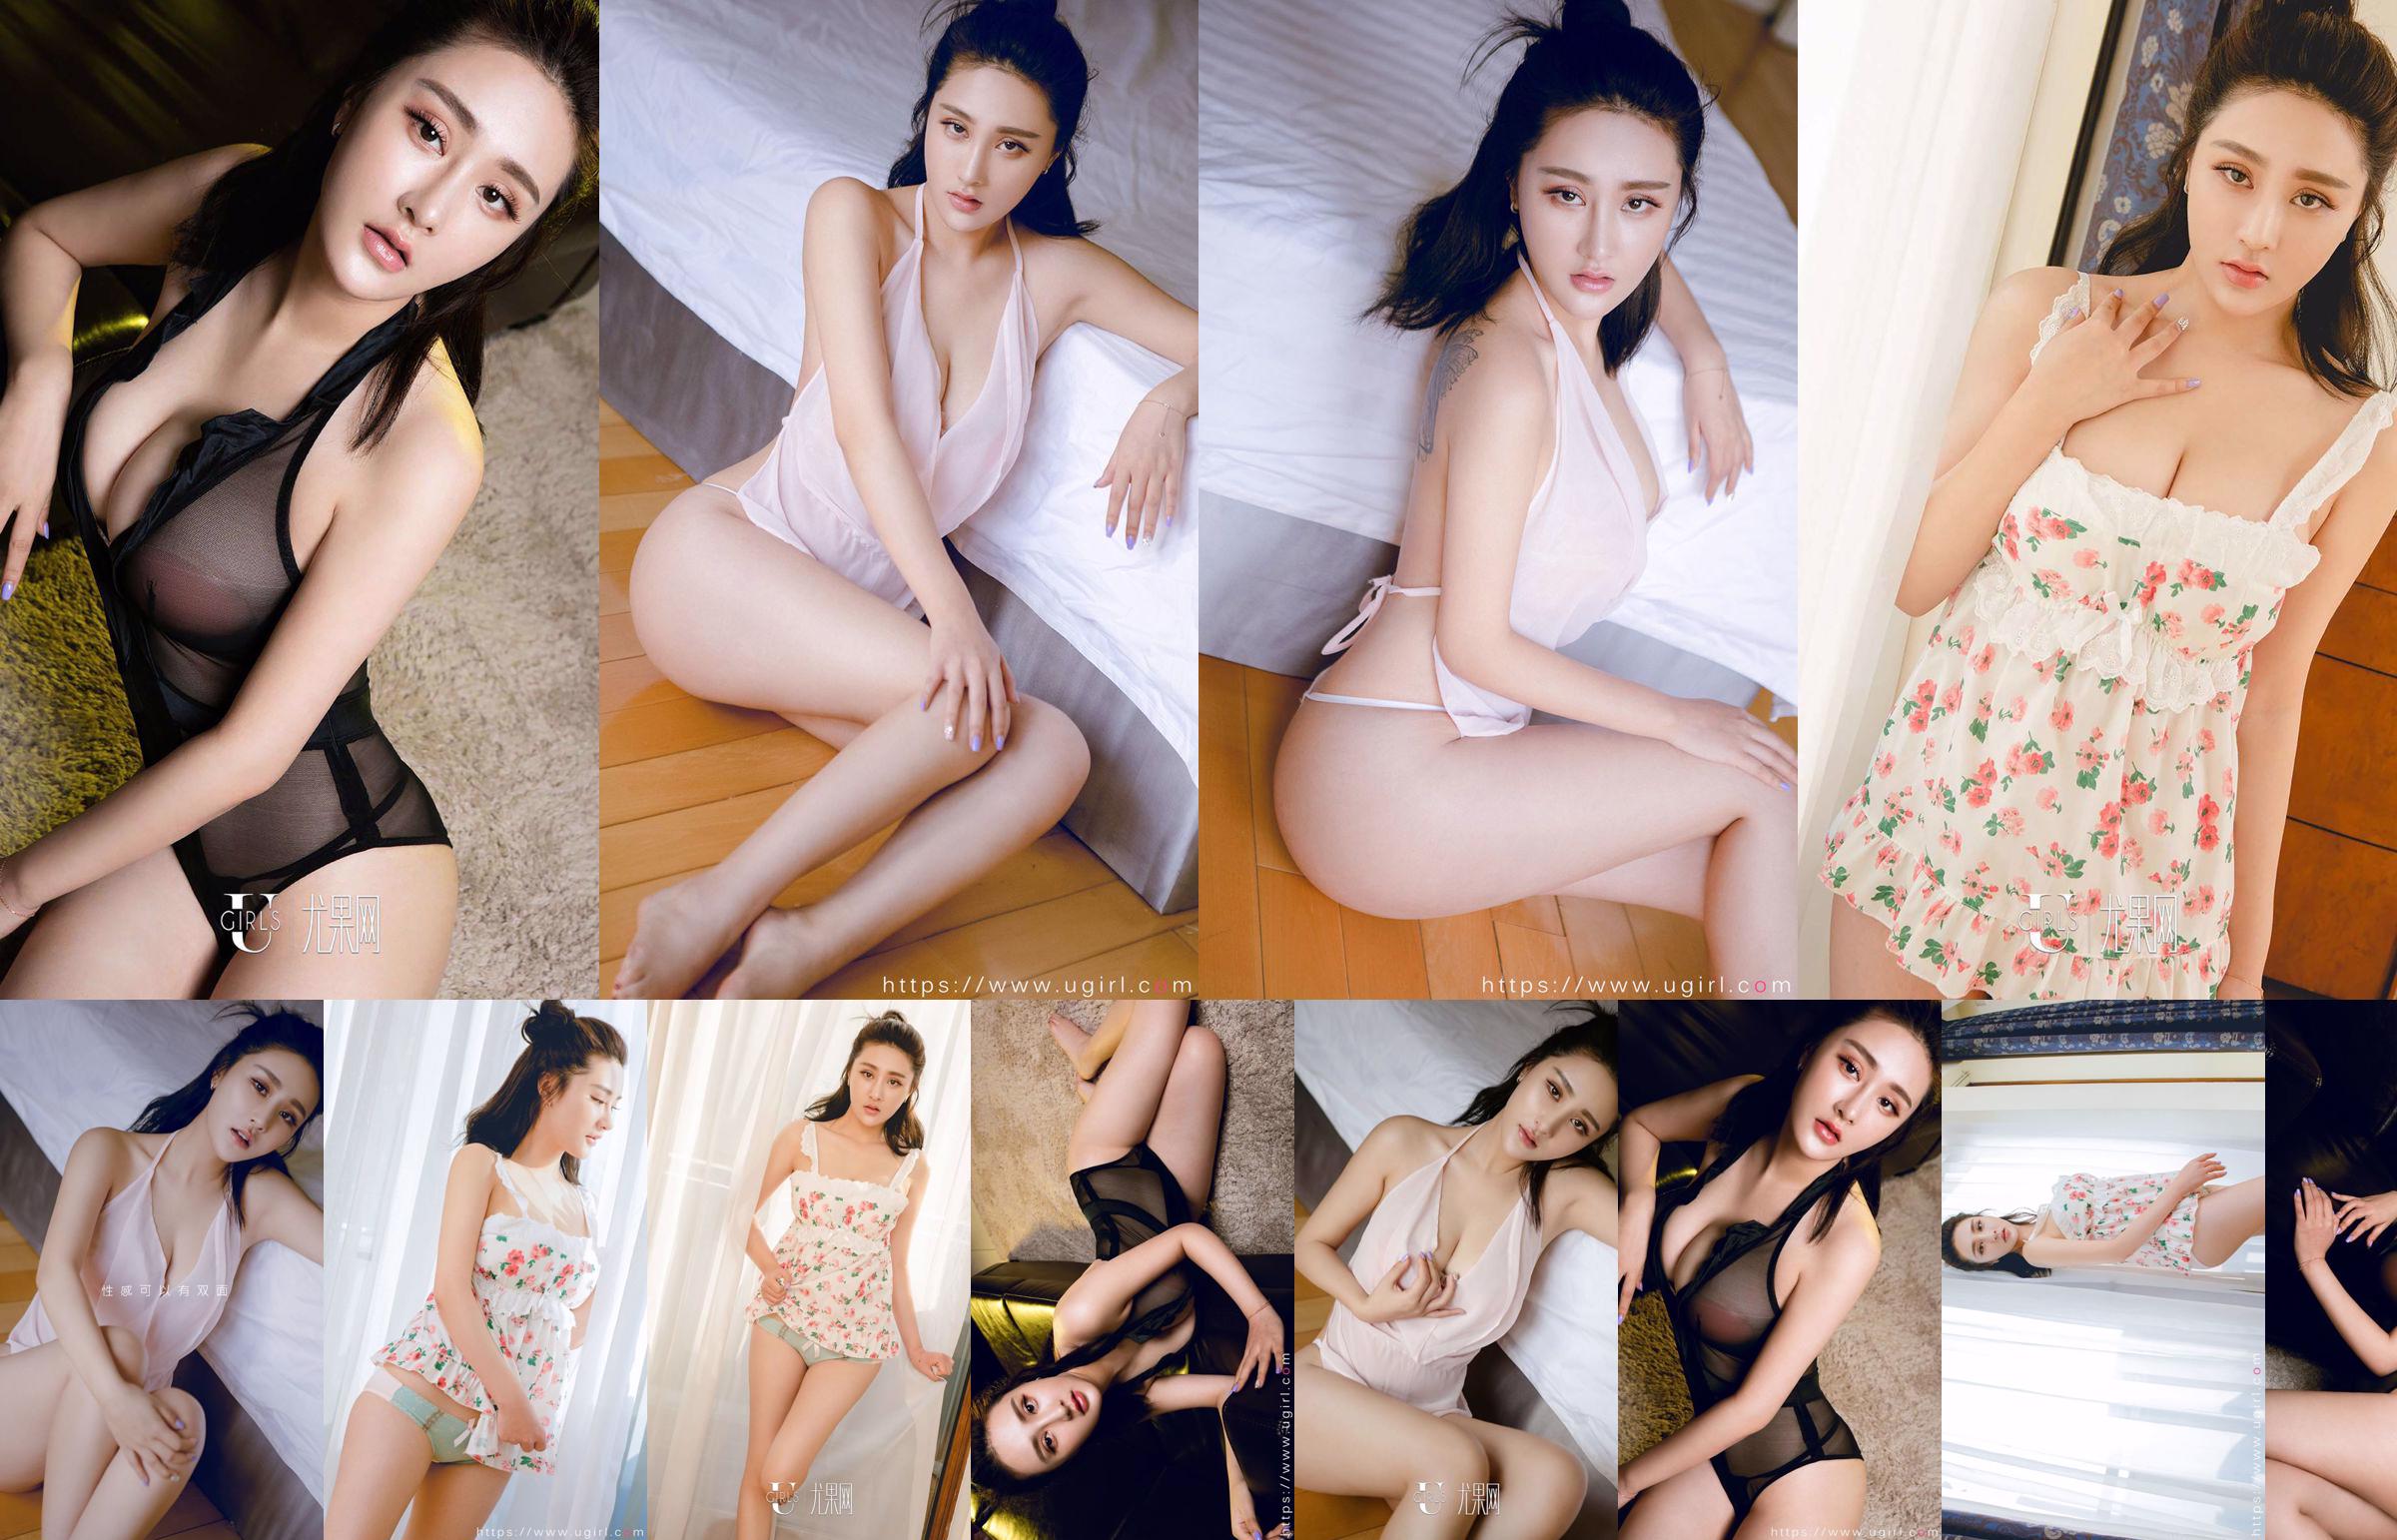 Zhang Xinmiao "It's All Angels' Trouble" [Love Youwu Ugirls] No.534 No.78fb52 Page 1